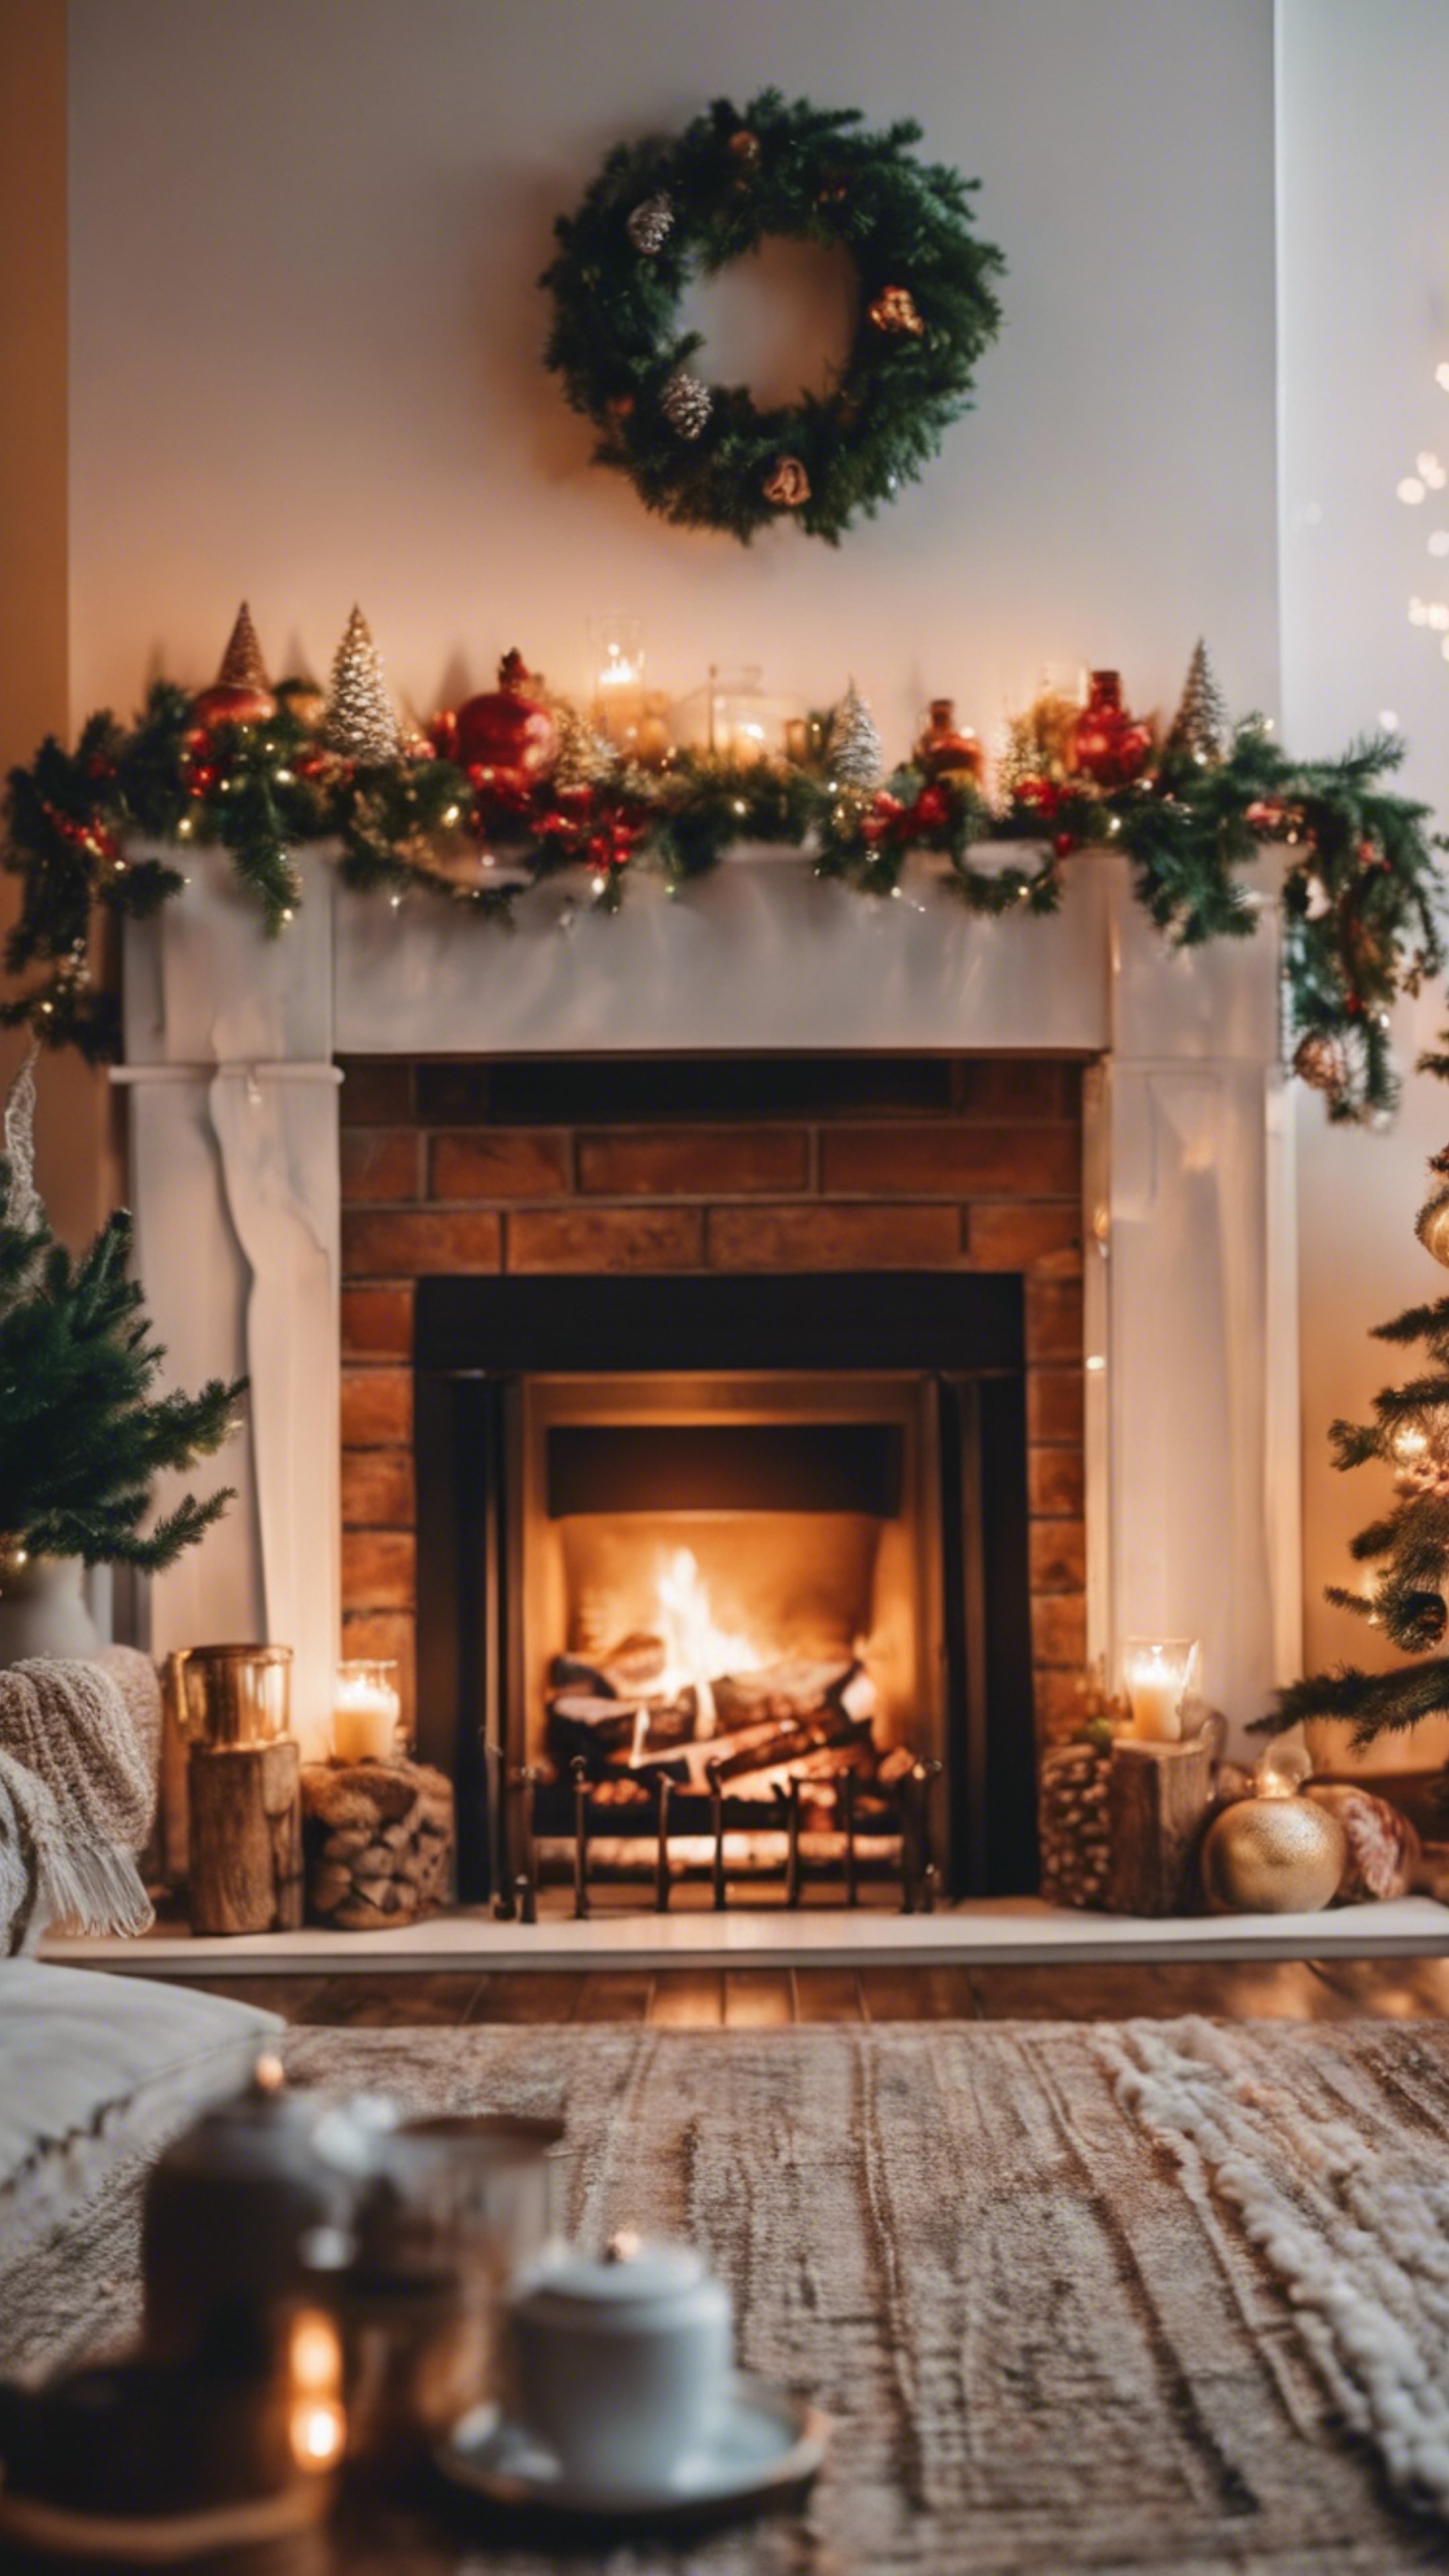 A cozy living room decorated for Christmas in boho style with a fireplace. Tapeta na zeď[2870ecc061ac4c6491a9]